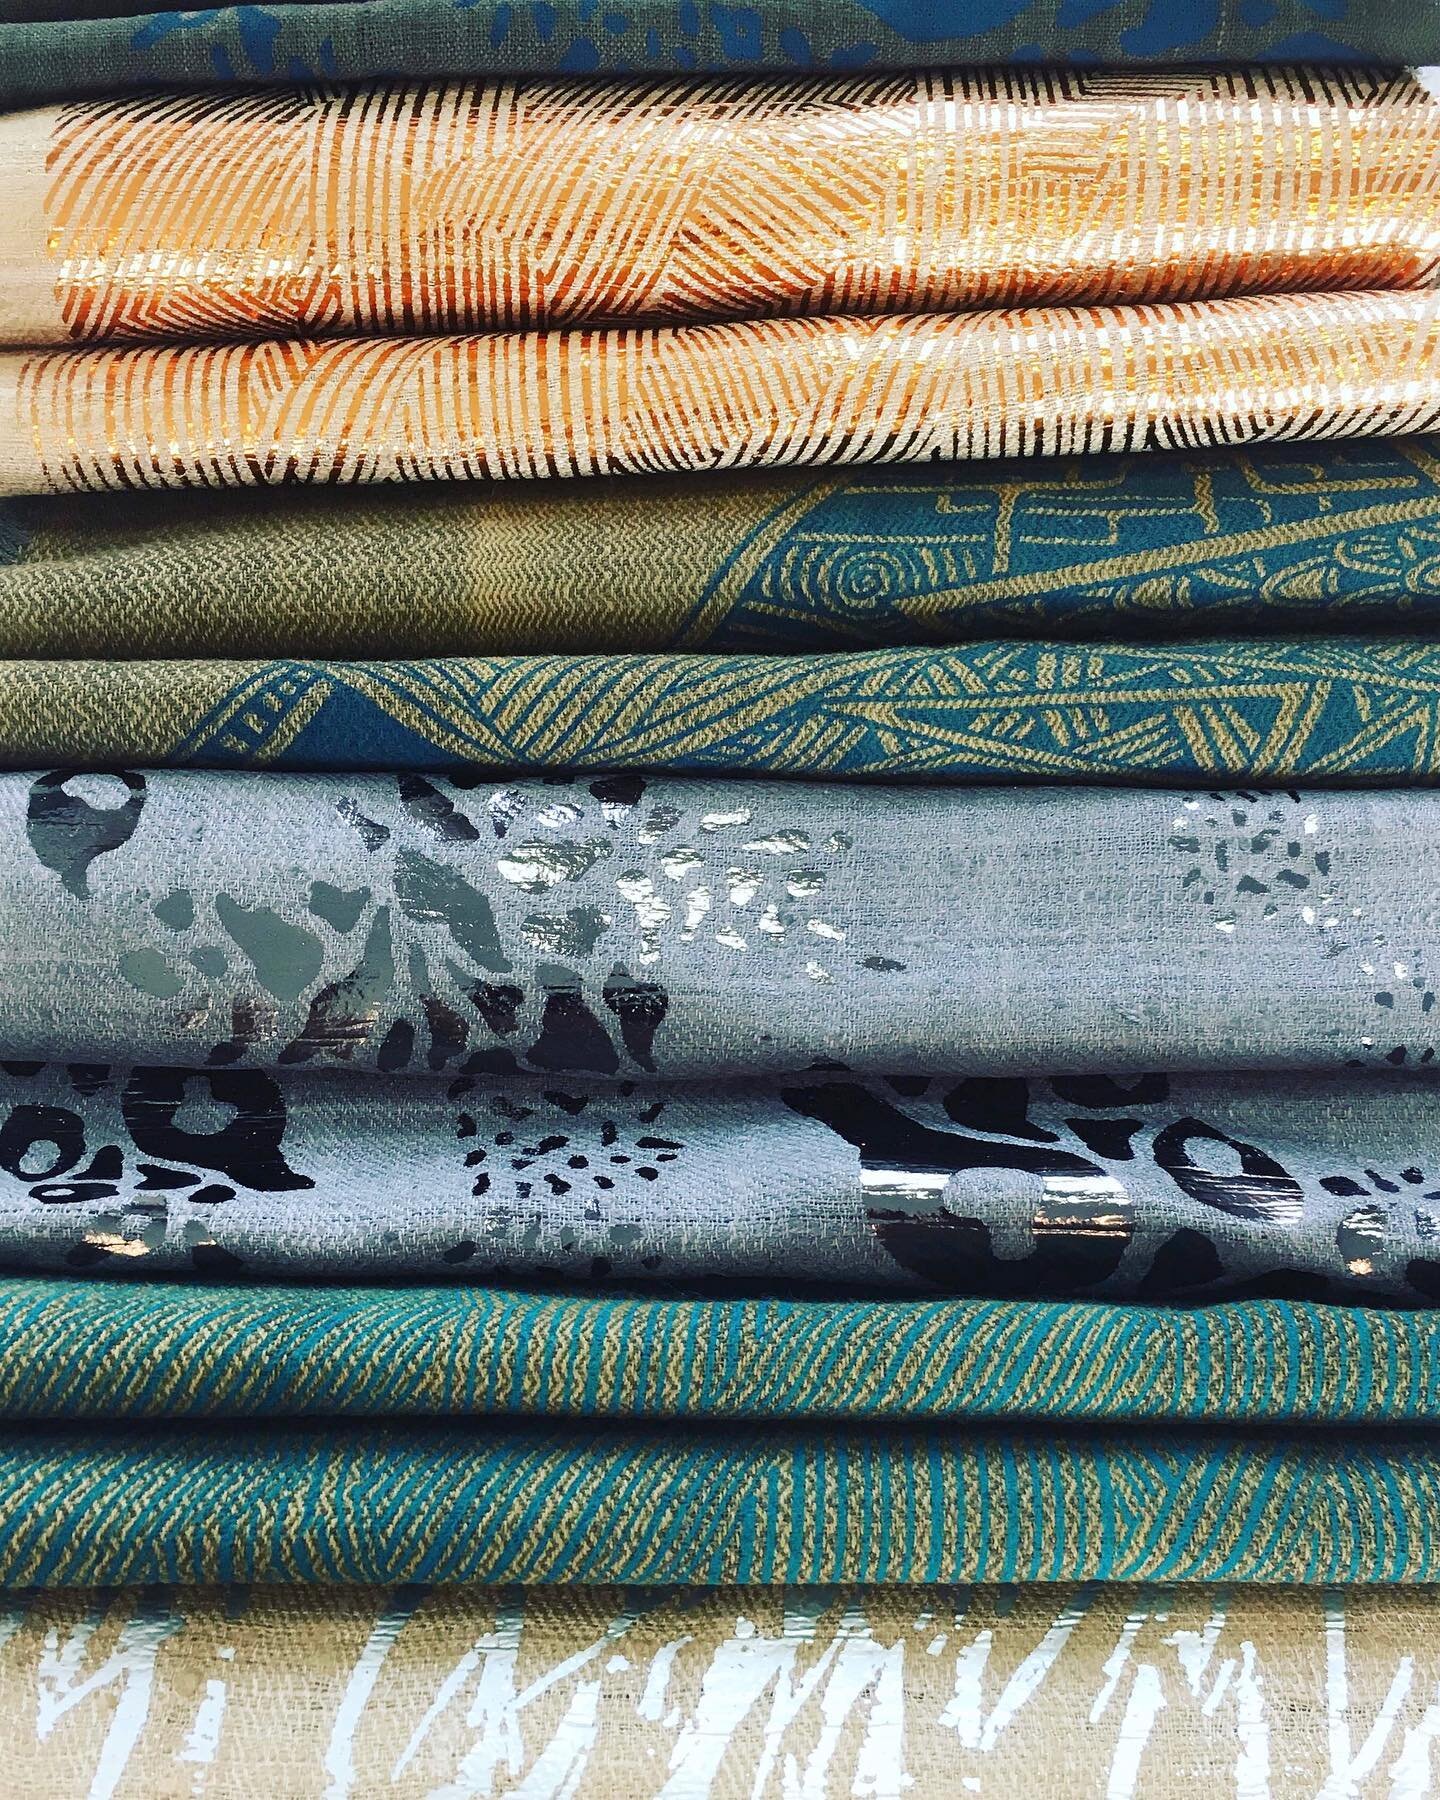 Next up in our updates from our freelancers: @kulutextiles ! 

Kulu Textiles have been busy working with a fair trade weavers cooperative, creating mixed media samples made from handspun, natural dyed eri silk. 

Kulus exciting collection offers scre